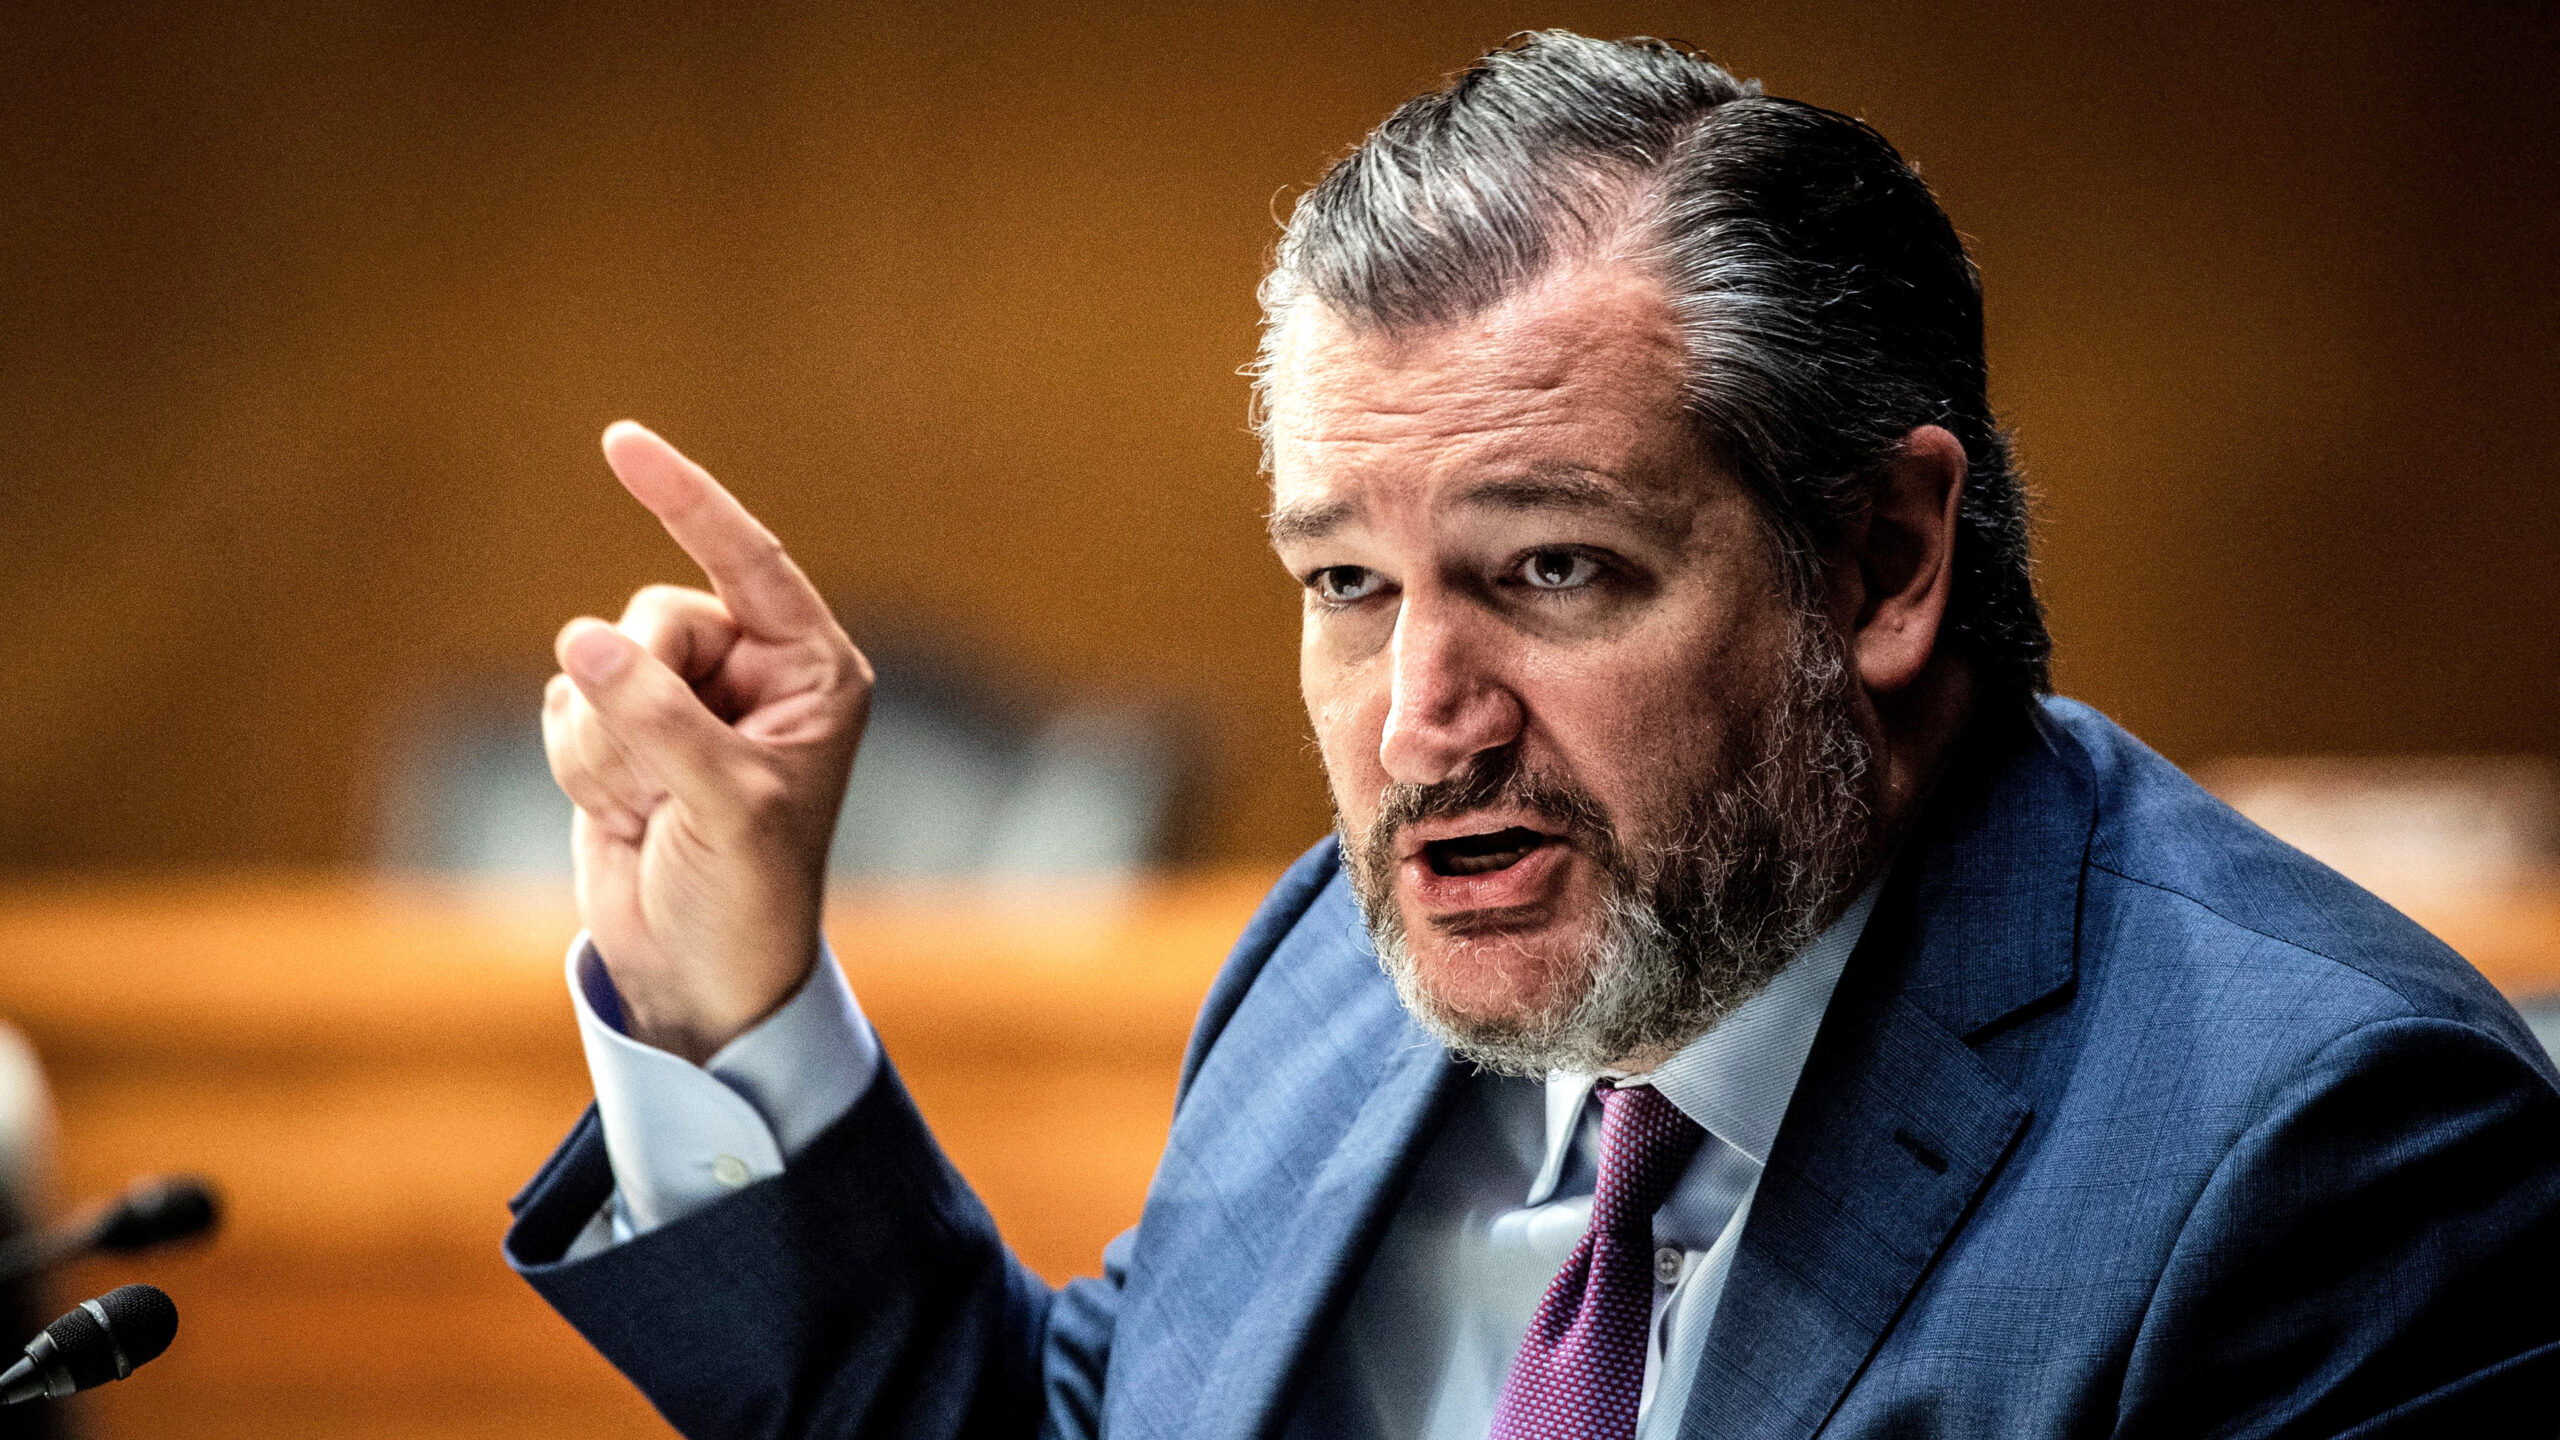 Ted Cruz Pushes Death Penalty For Illegal Alien Accused Of Murdering 5 In Texas